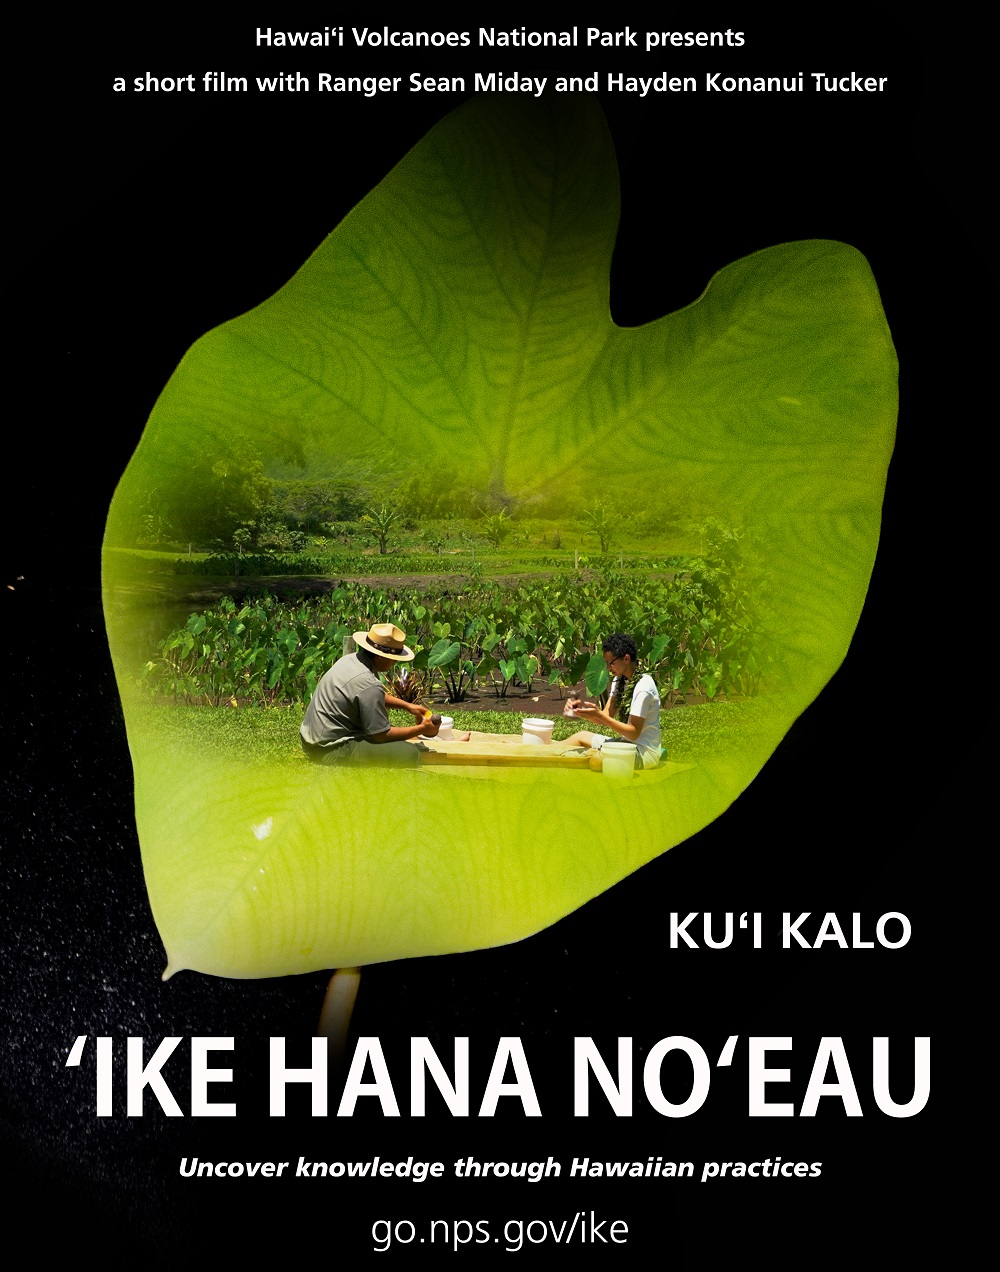 Movie poster with black background and a large green leaf  with text. In the green leaf are two people sitting down